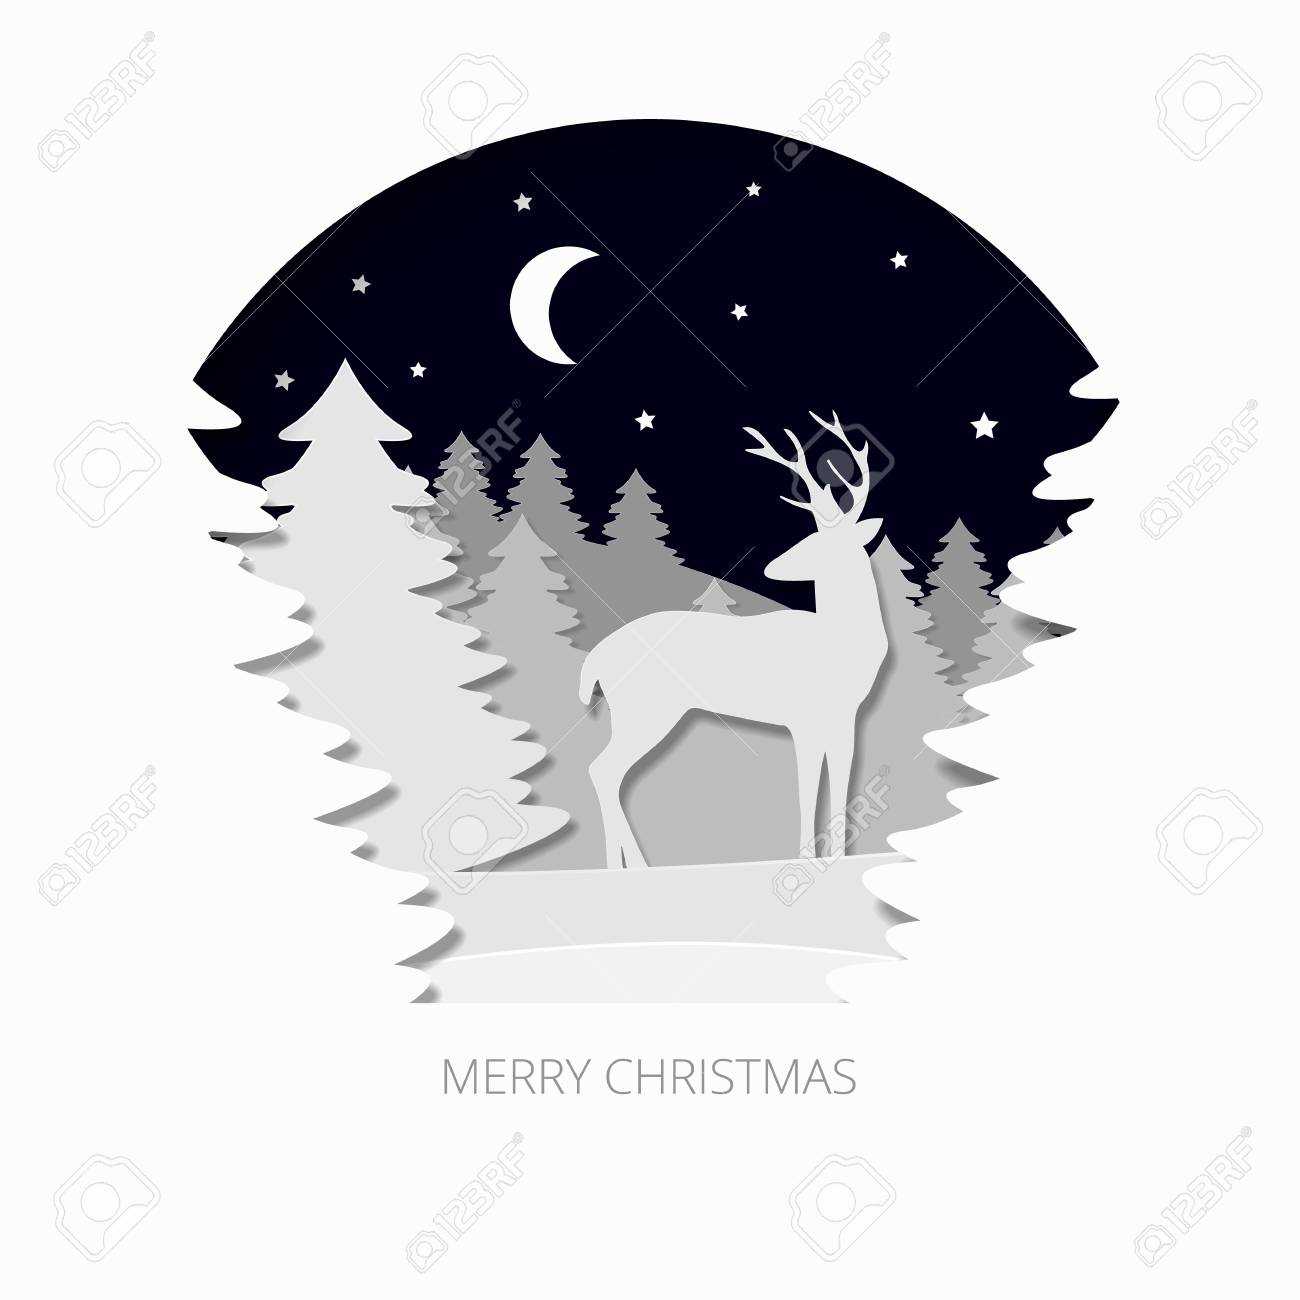 Merry Christmas 3D Abstract Paper Cut Illlustration Of Christmas Tree,  Deer, Moon And Stars In The Night. Vector Greeting Card Template In Carving  Art With 3D Christmas Tree Card Template